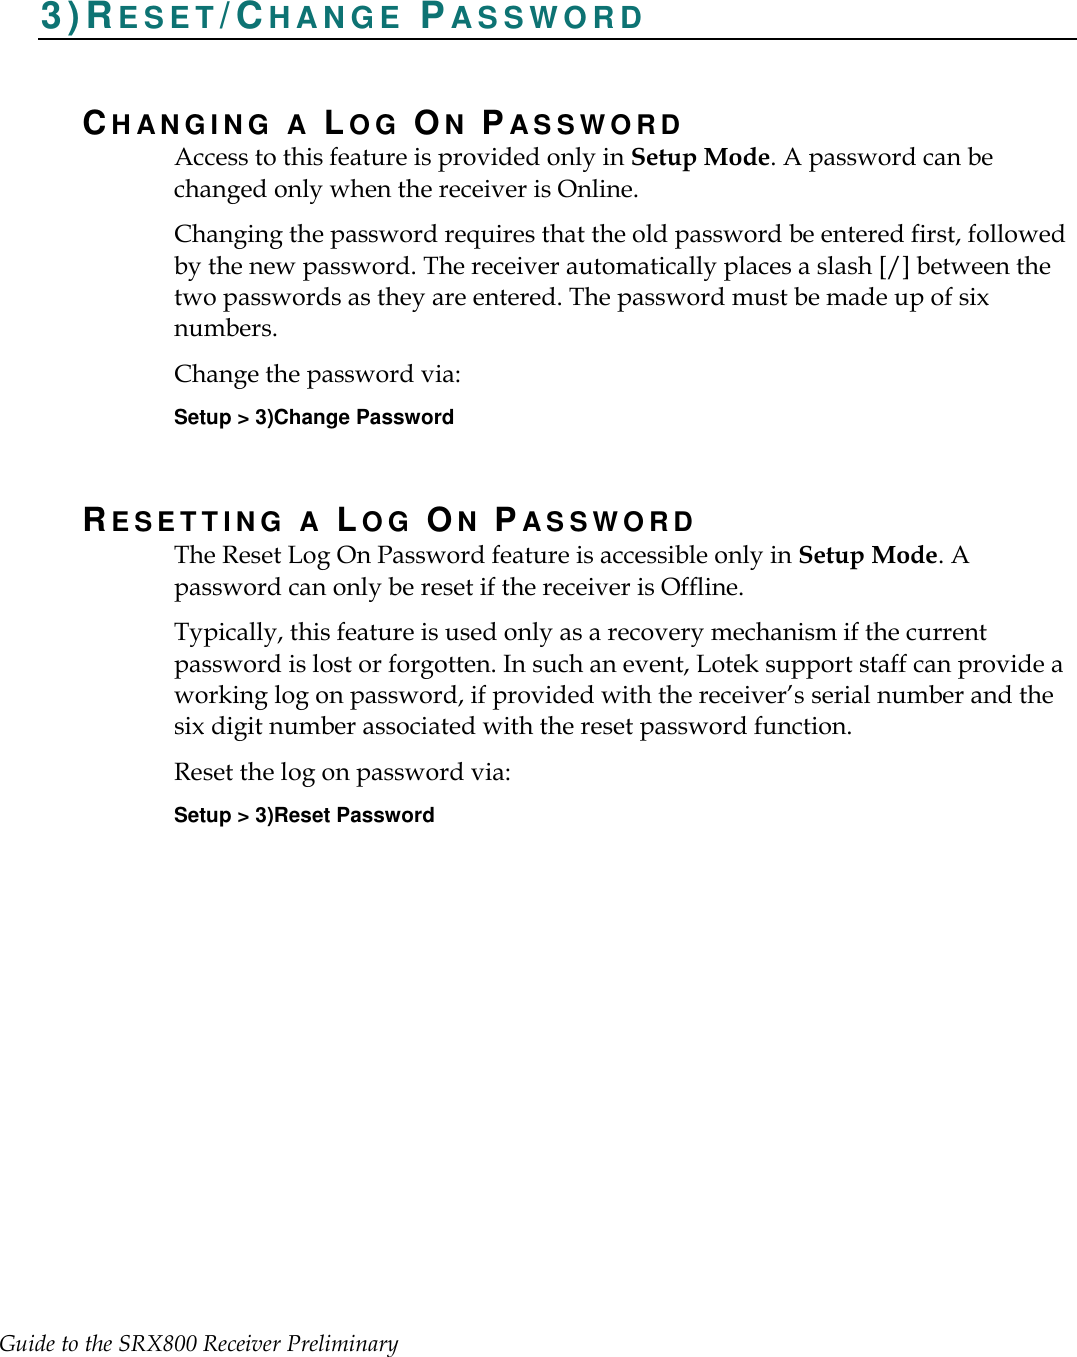 Guide to the SRX800 Receiver Preliminary     3)RE S E T /CH A N G E   PA S S W O R D  CH AN G I N G   A  LOG ON PA S S W O R D  Access to this feature is provided only in Setup Mode. A password can be changed only when the receiver is Online.   Changing the password requires that the old password be entered first, followed by the new password. The receiver automatically places a slash [/] between the two passwords as they are entered. The password must be made up of six numbers. Change the password via: Setup &gt; 3)Change Password RESETTING A LOG ON PA S S W O R D  The Reset Log On Password feature is accessible only in Setup Mode. A password can only be reset if the receiver is Offline. Typically, this feature is used only as a recovery mechanism if the current password is lost or forgotten. In such an event, Lotek support staff can provide a working log on password, if provided with the receiver’s serial number and the six digit number associated with the reset password function.   Reset the log on password via: Setup &gt; 3)Reset Password  